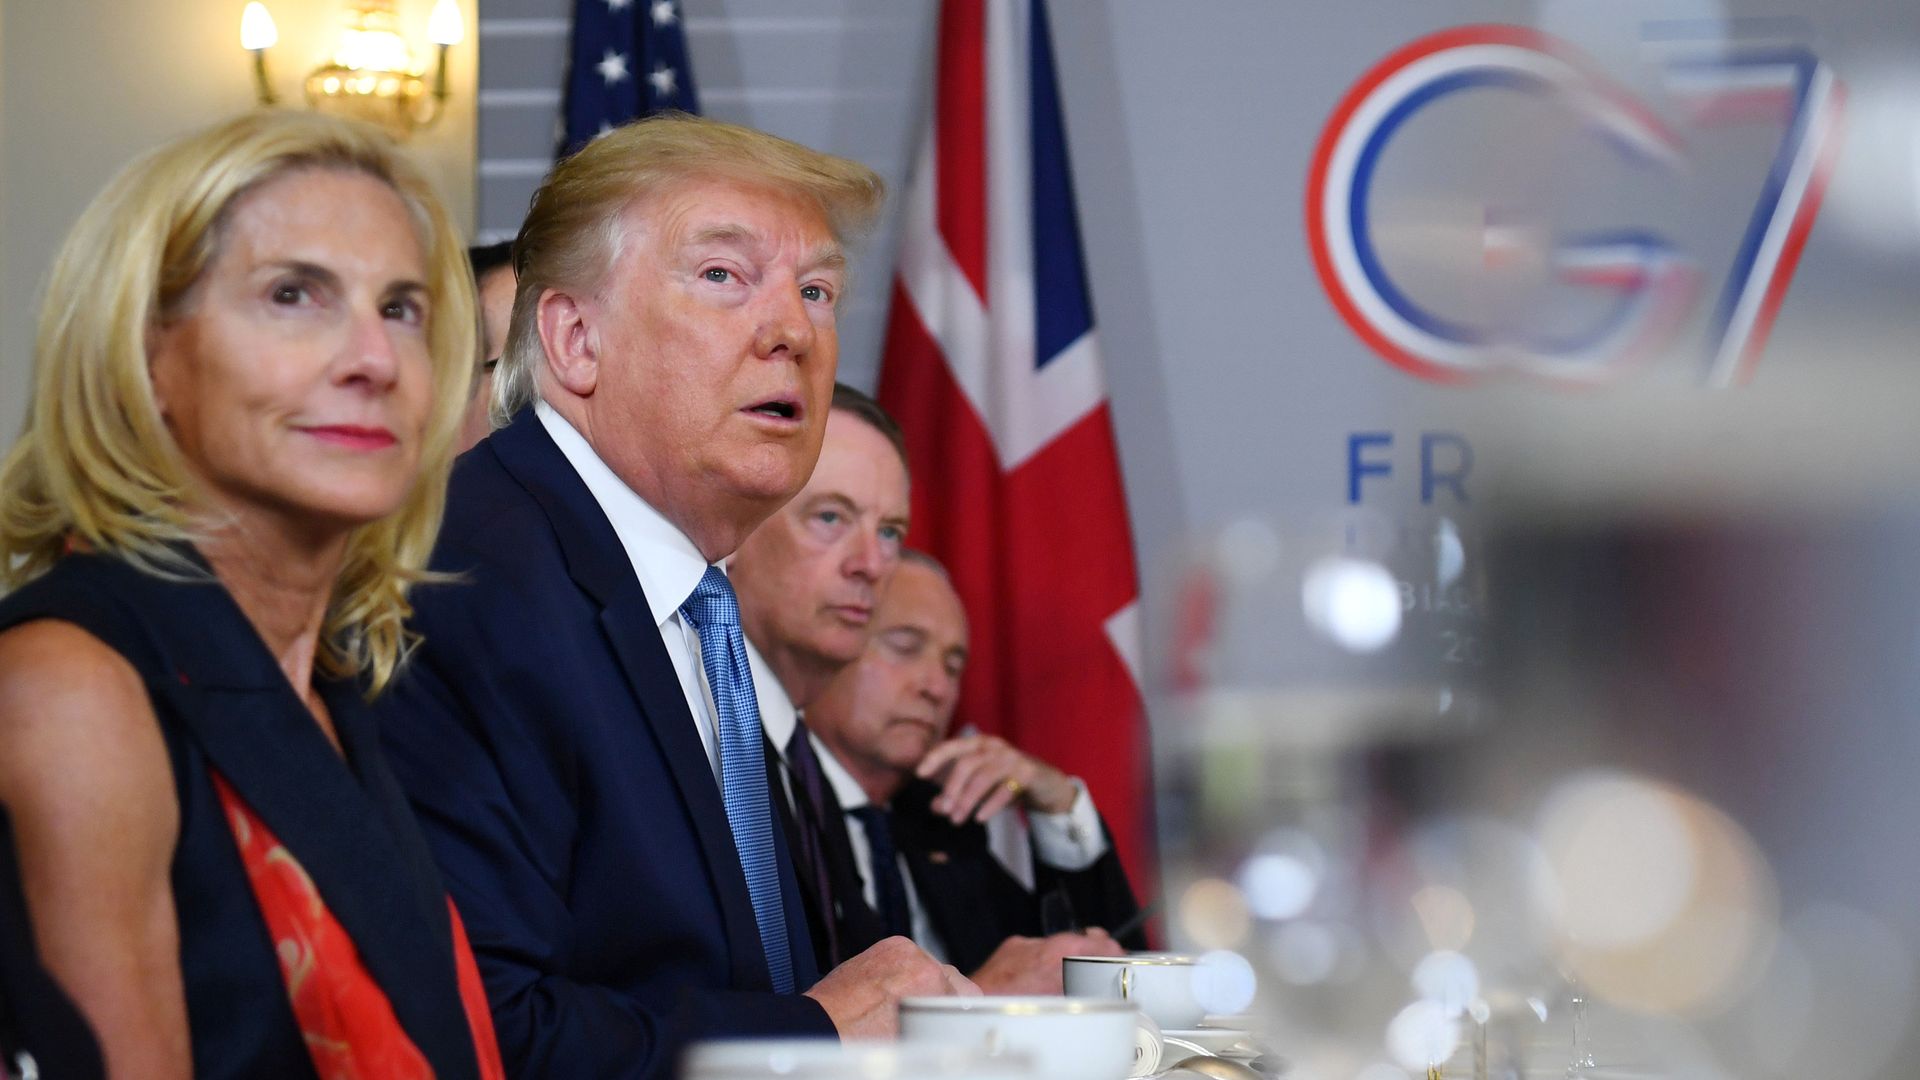  President Donald Trump attends a bilateral meeting at the G7